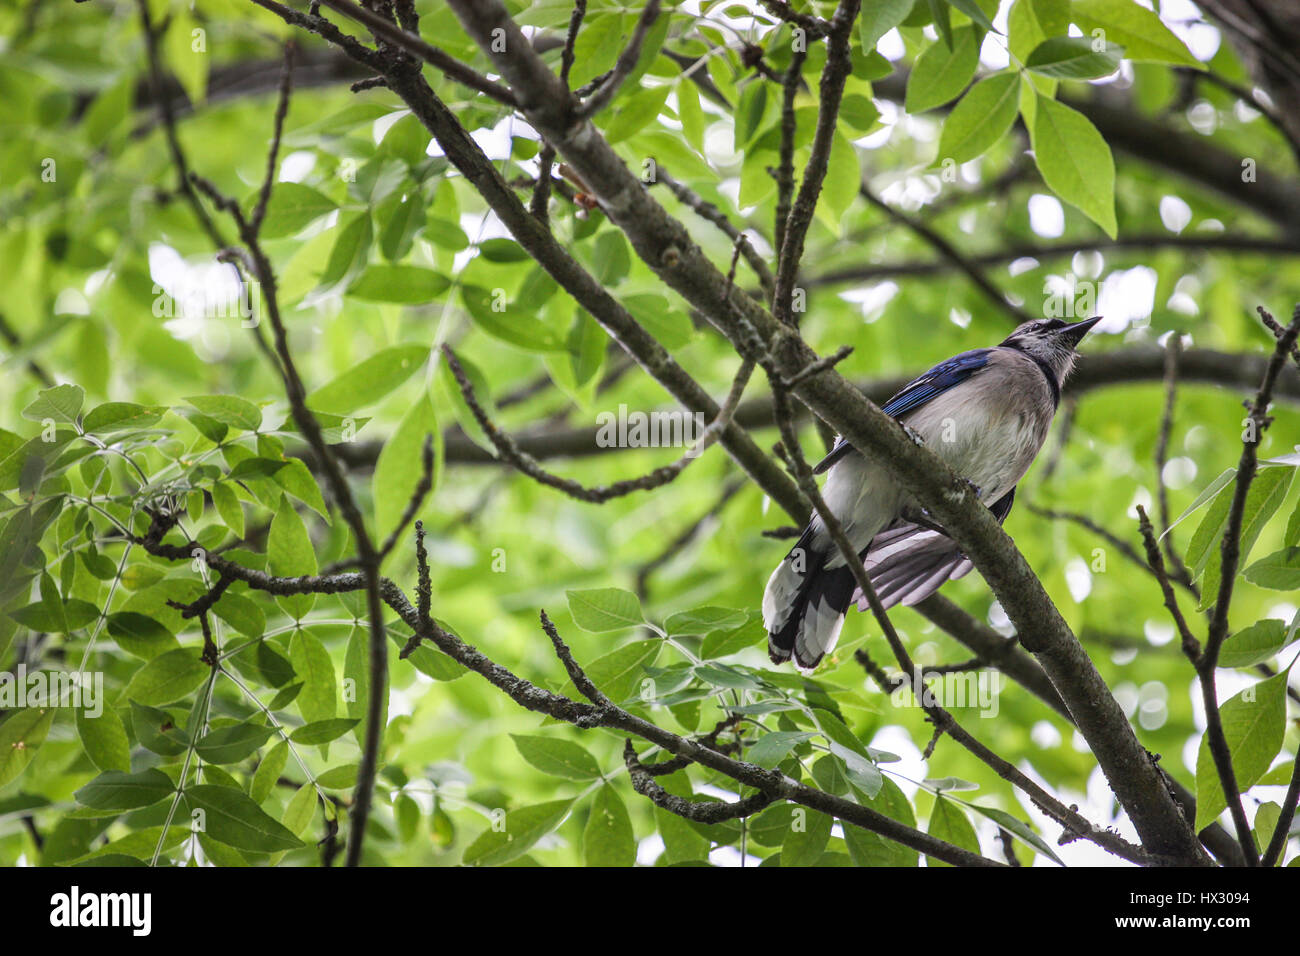 blue jay bird in a green forest Stock Photo